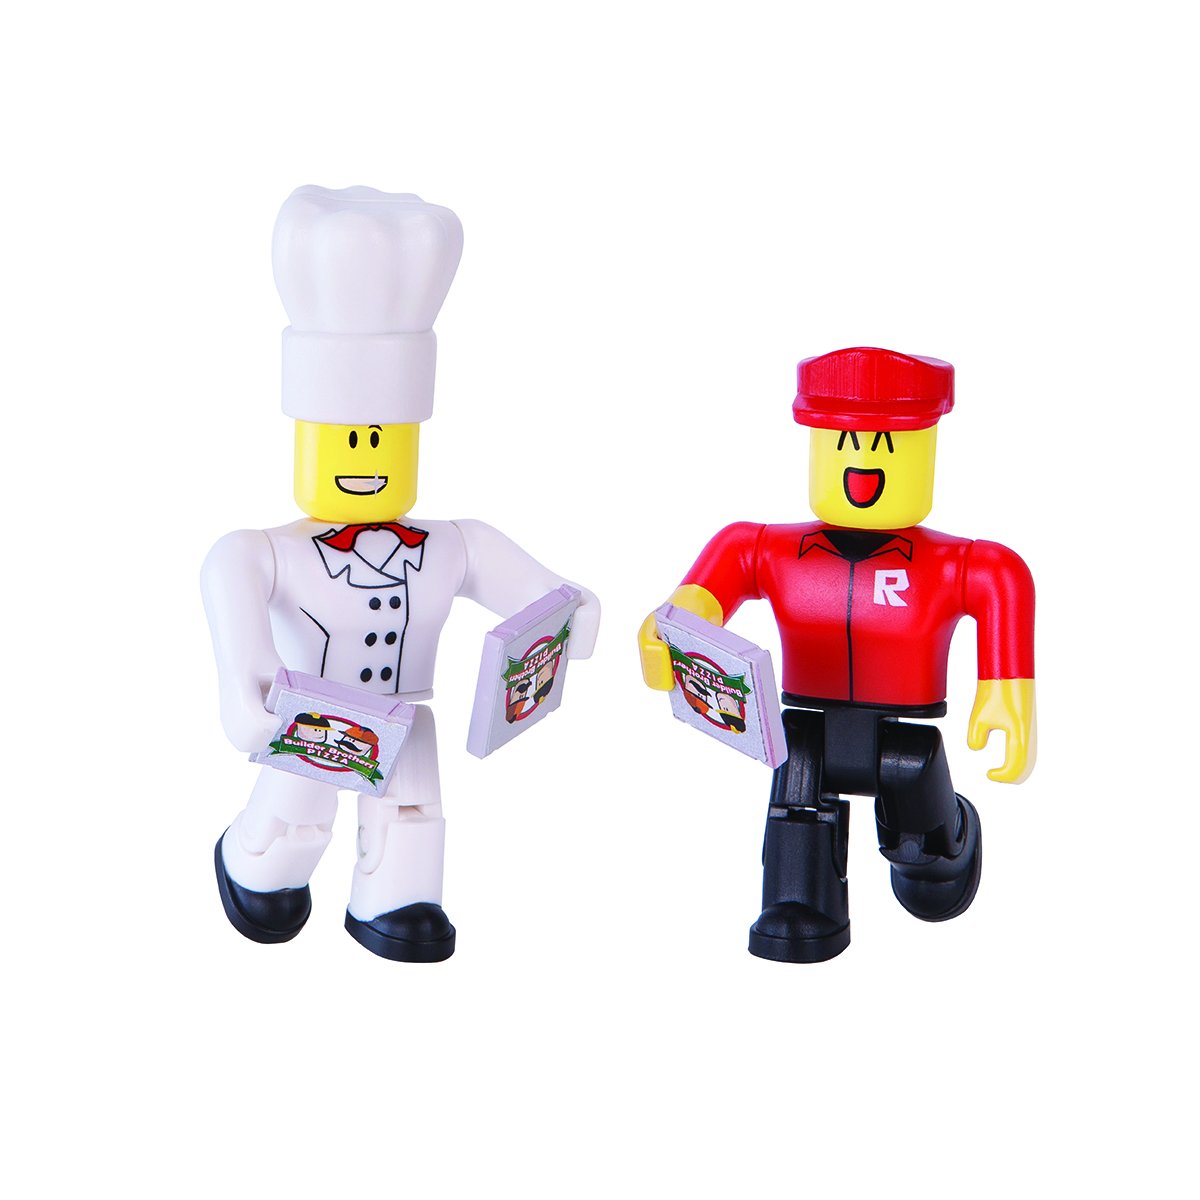 Roblox On Twitter There S Time Left To Join The Contest Tweet Fill In The Blank For A Chance To Win Free Roblox Toys I Want Robloxtoys Because Https T Co Ncrnphyqdx - roblox toys twitter